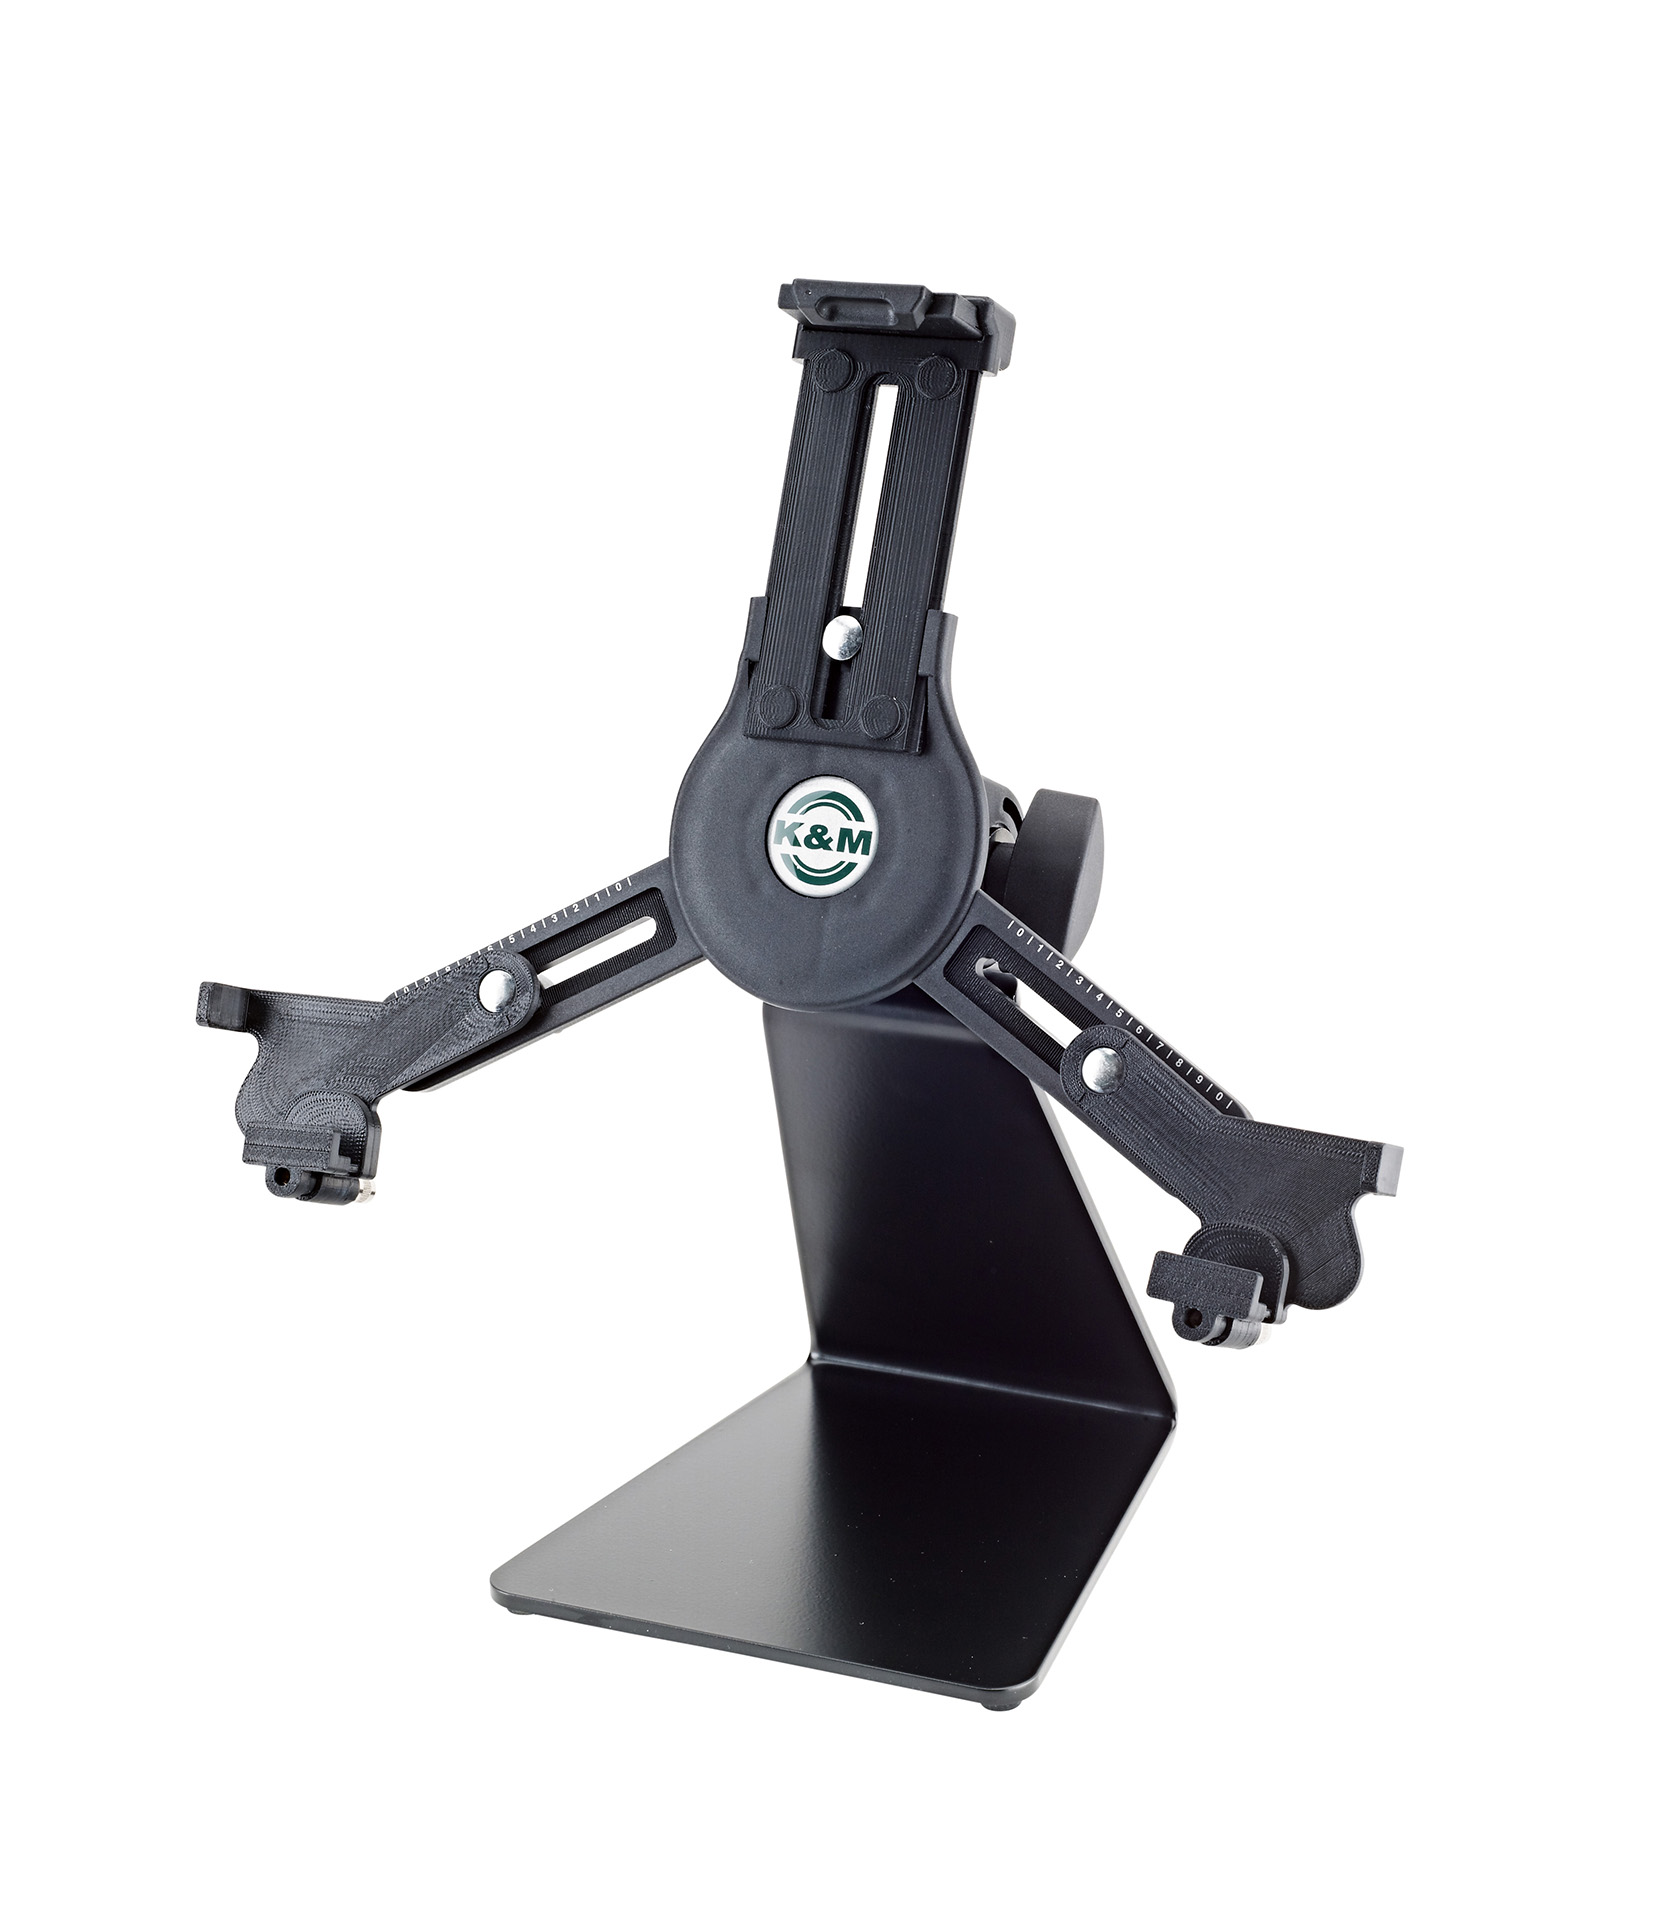 K&M - 19792 000 55 Table Stand w Universal Tablet Holder